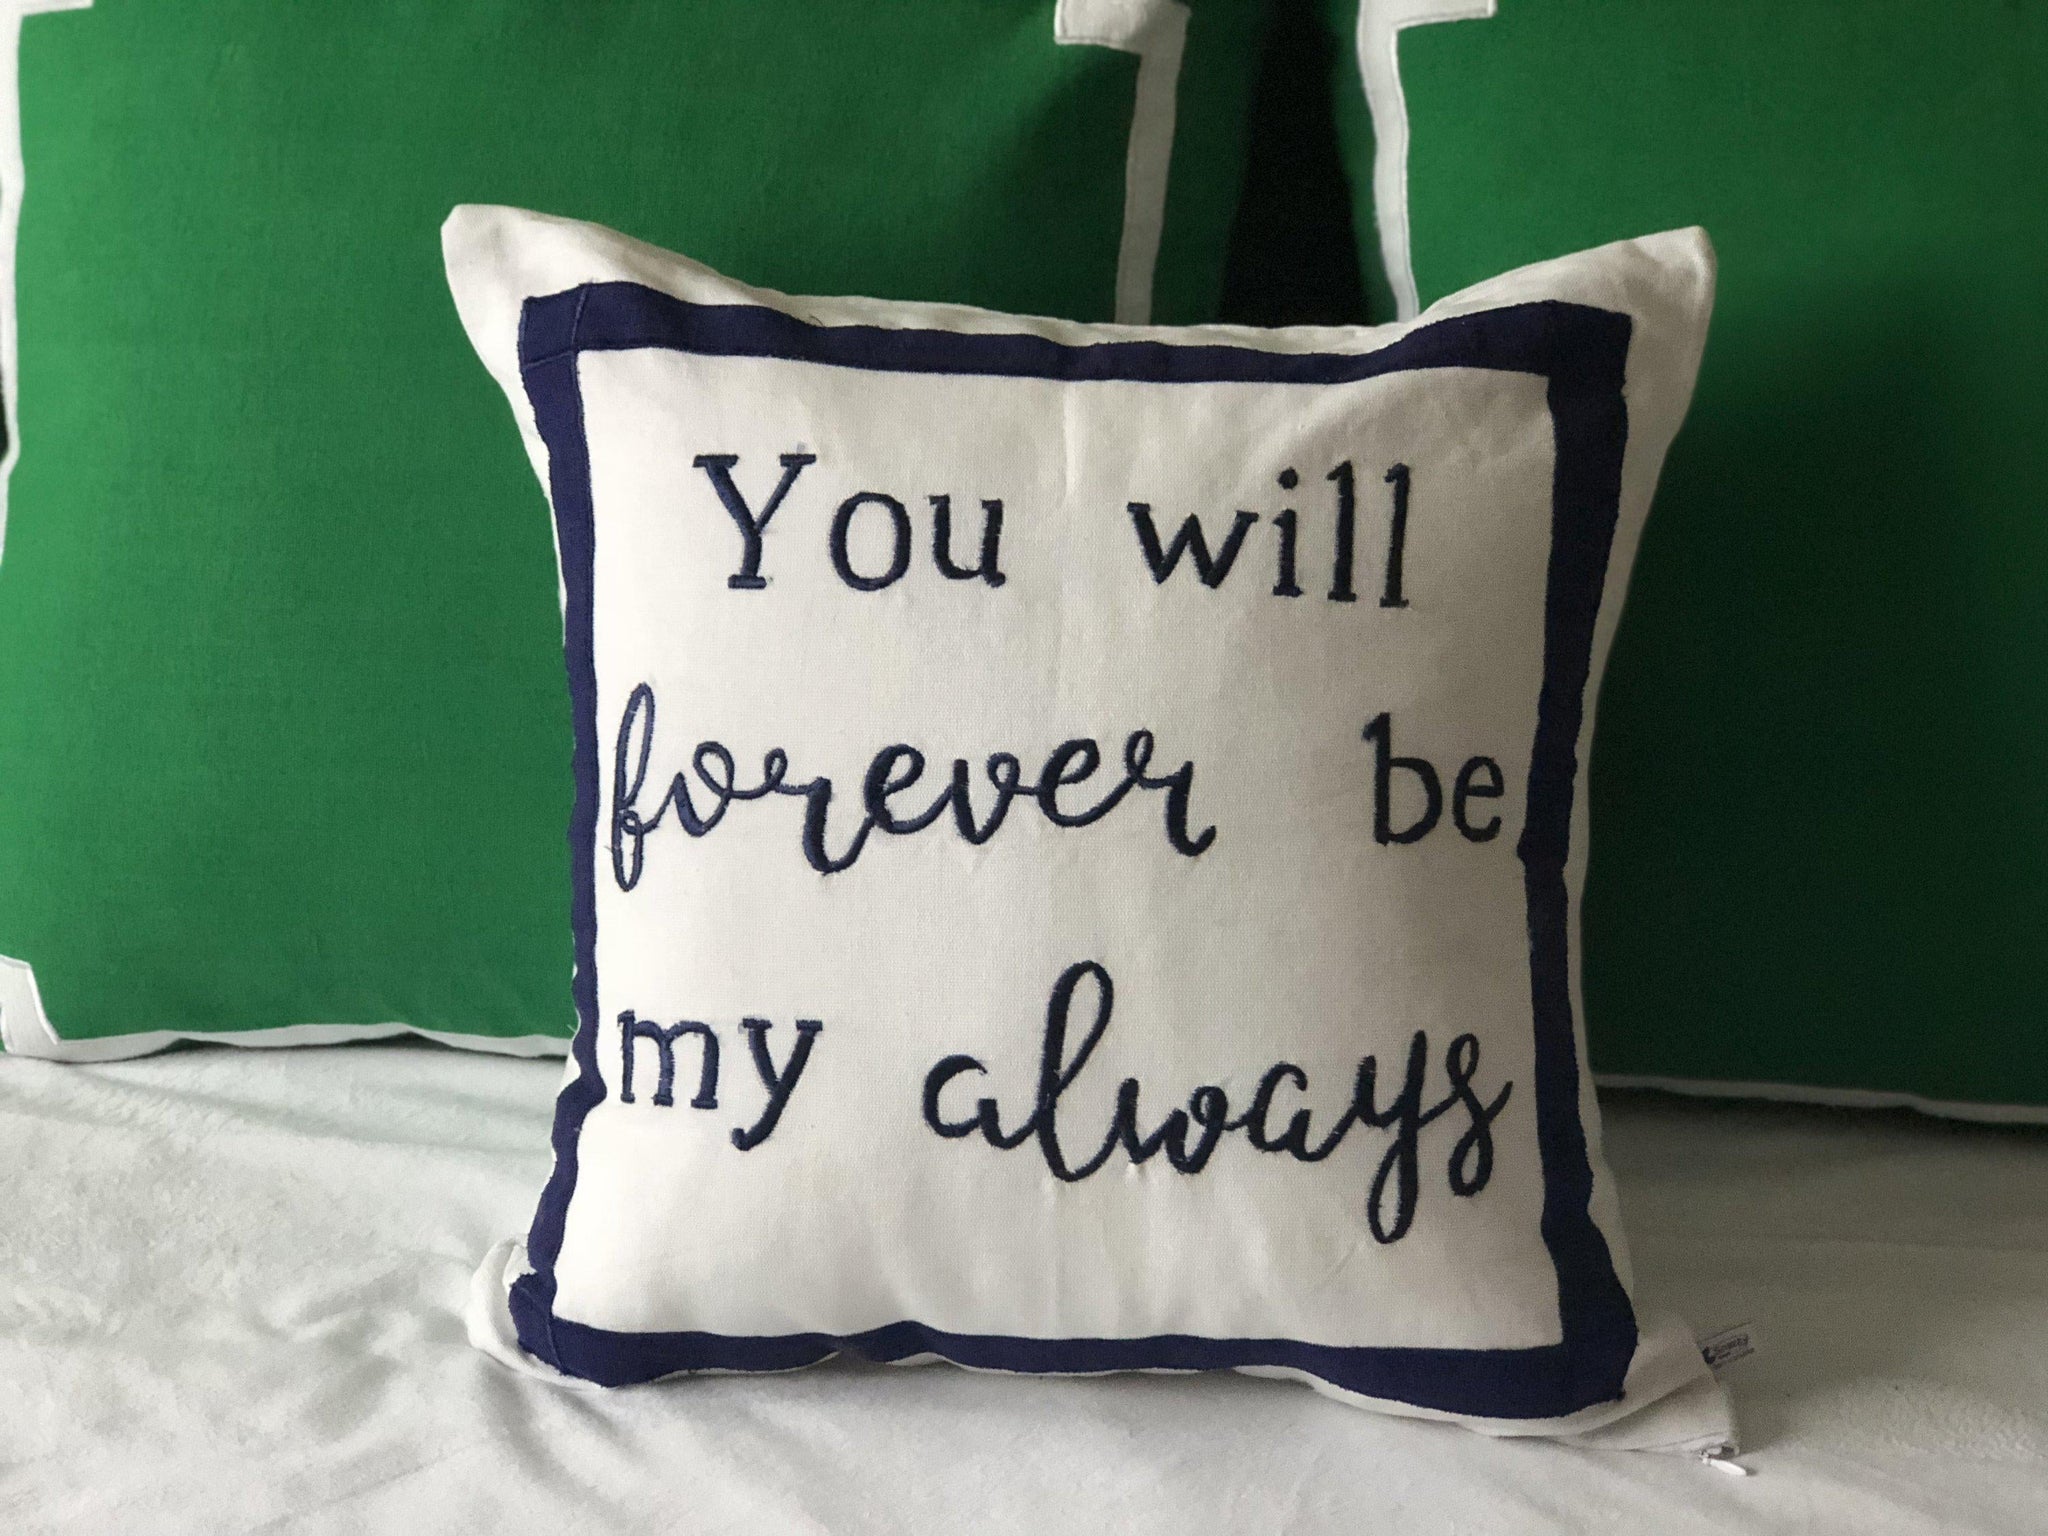 Anniversary Pillow Covers, Unique Birthday Grift, Throw Pillows with Words